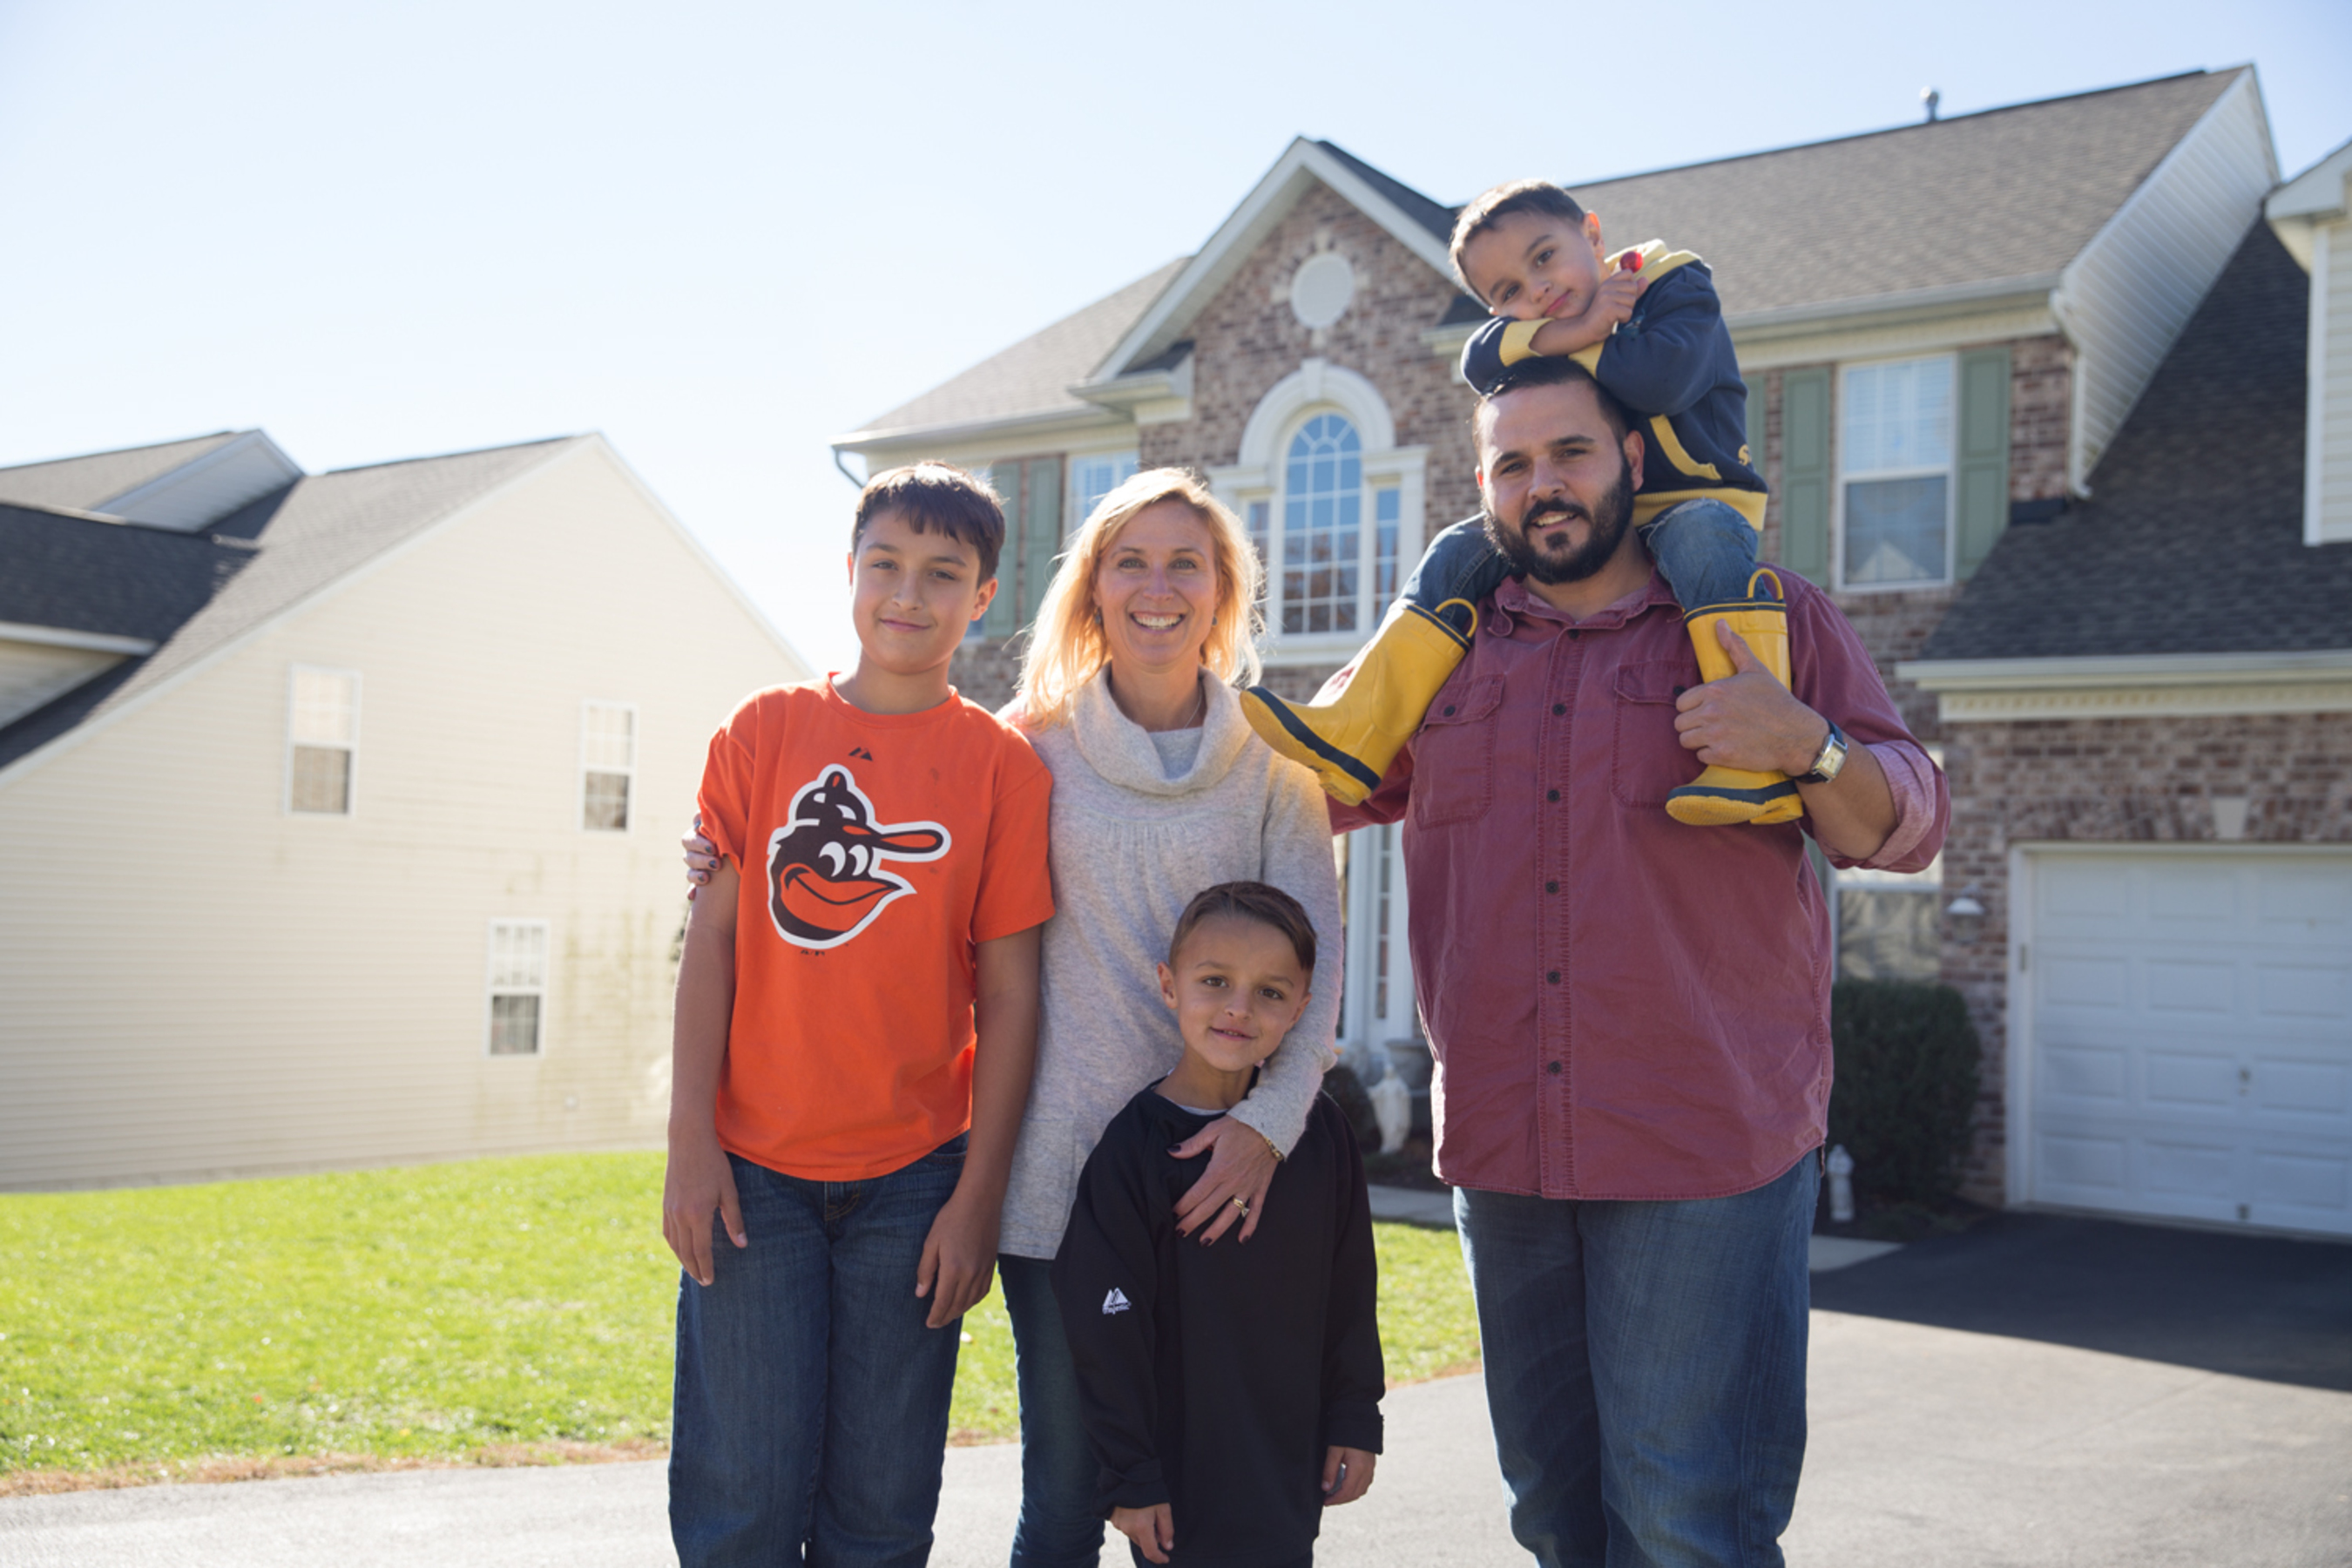 Erin Justice of Laurel, MD chose solar for potential cost savings for her family. (PRNewsFoto/Vivint Solar)